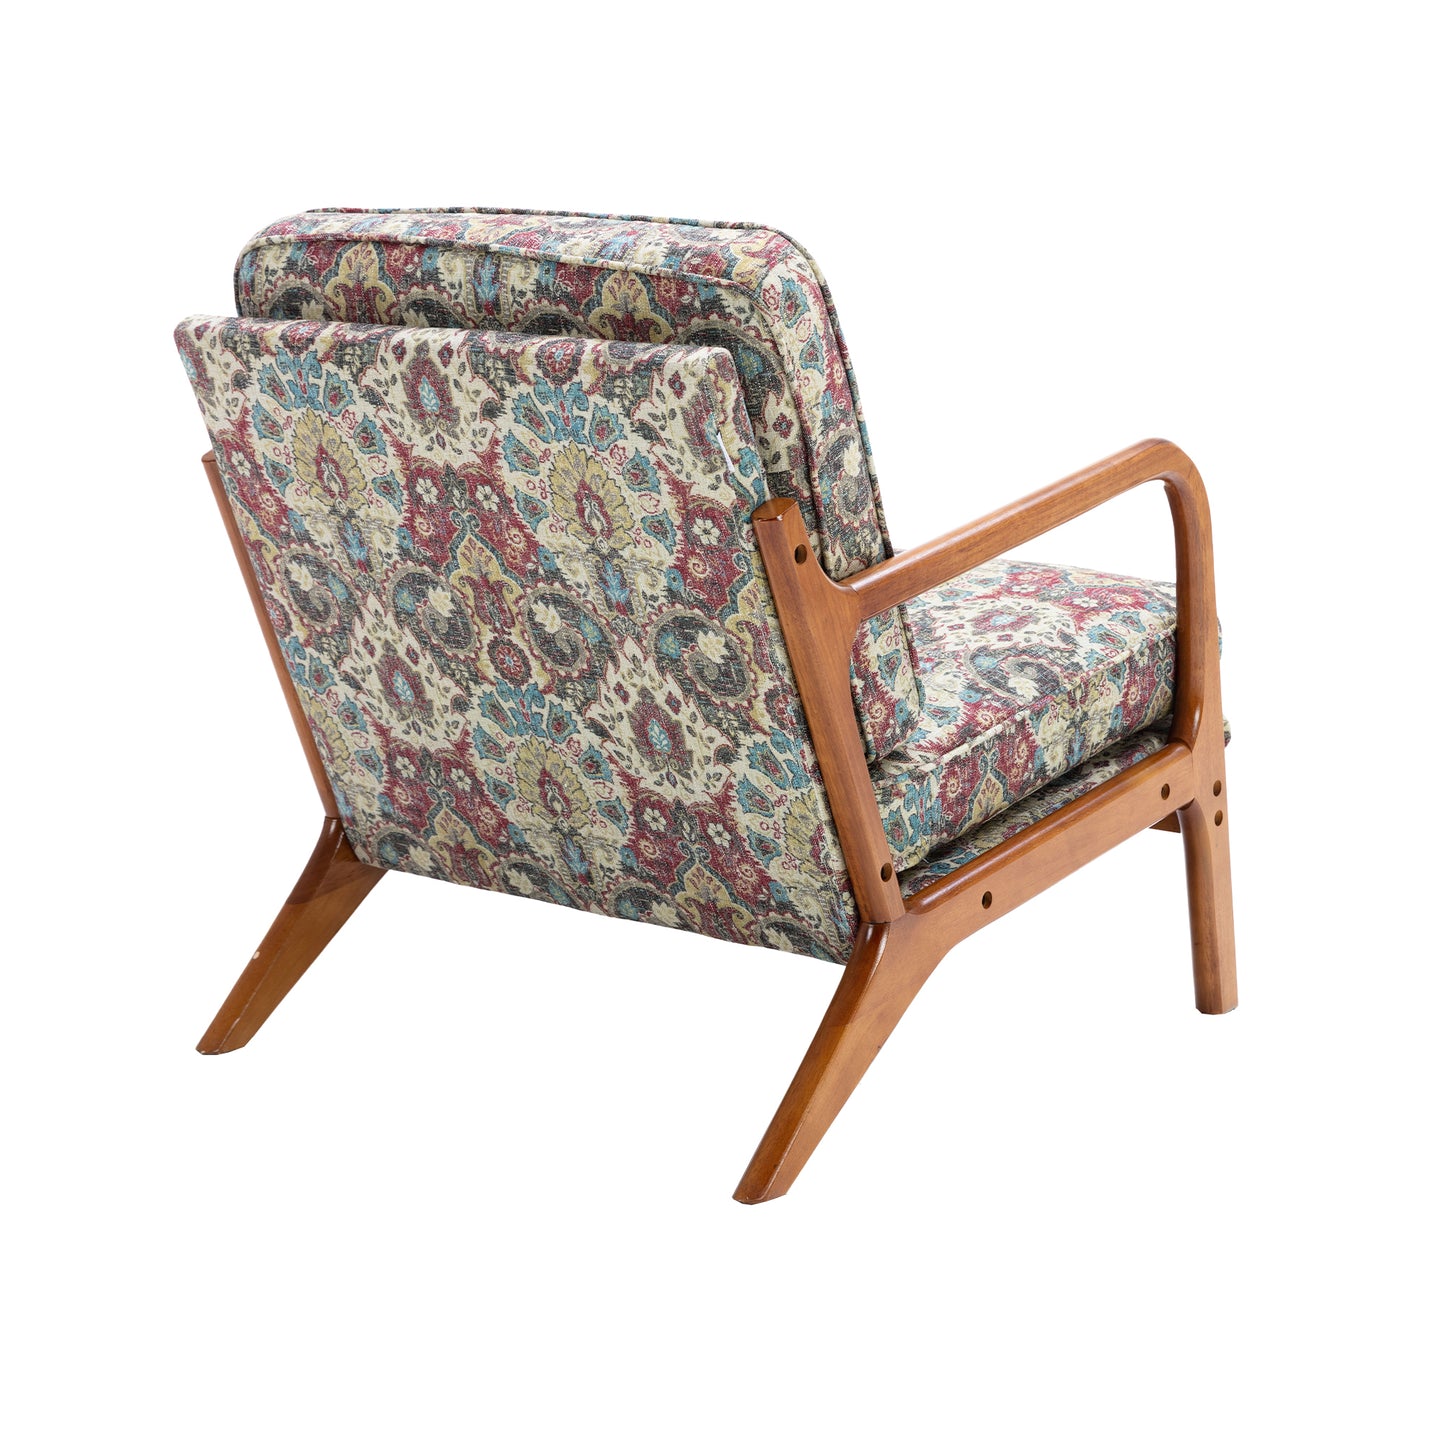 Gipsy, Solid Wood Frame Armchair for Living Room